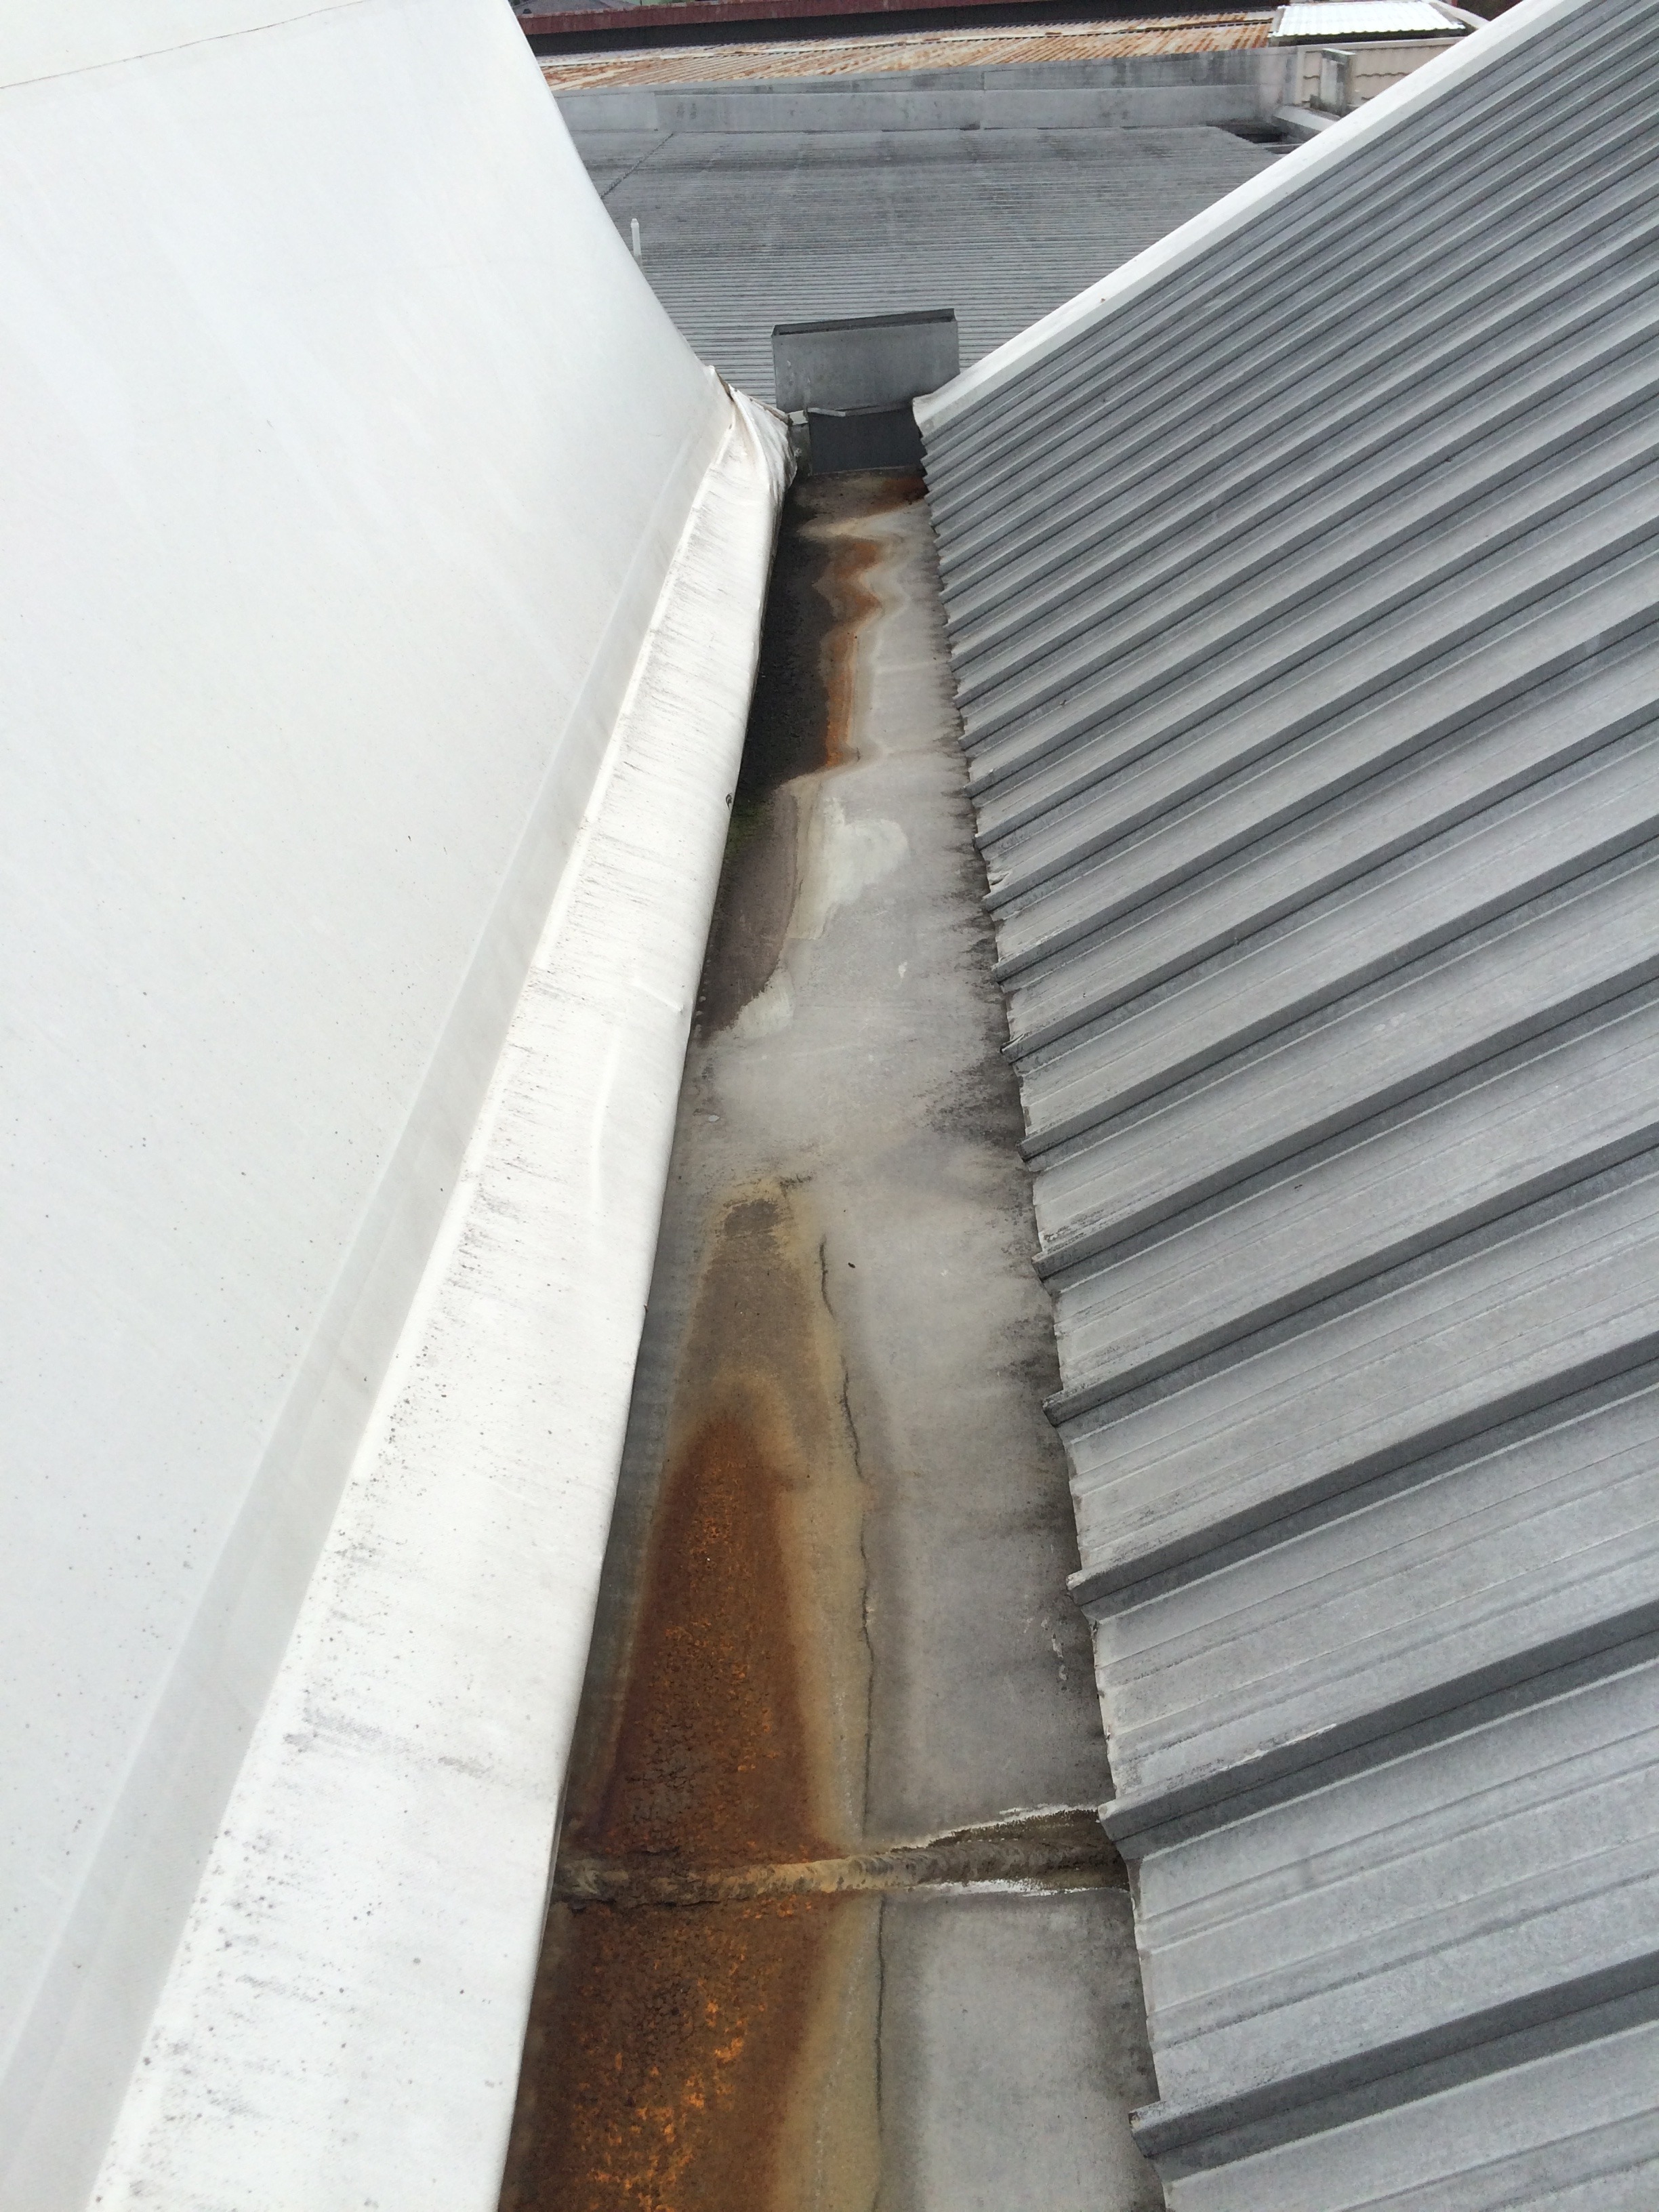 Box gutter with stagnant water and rust